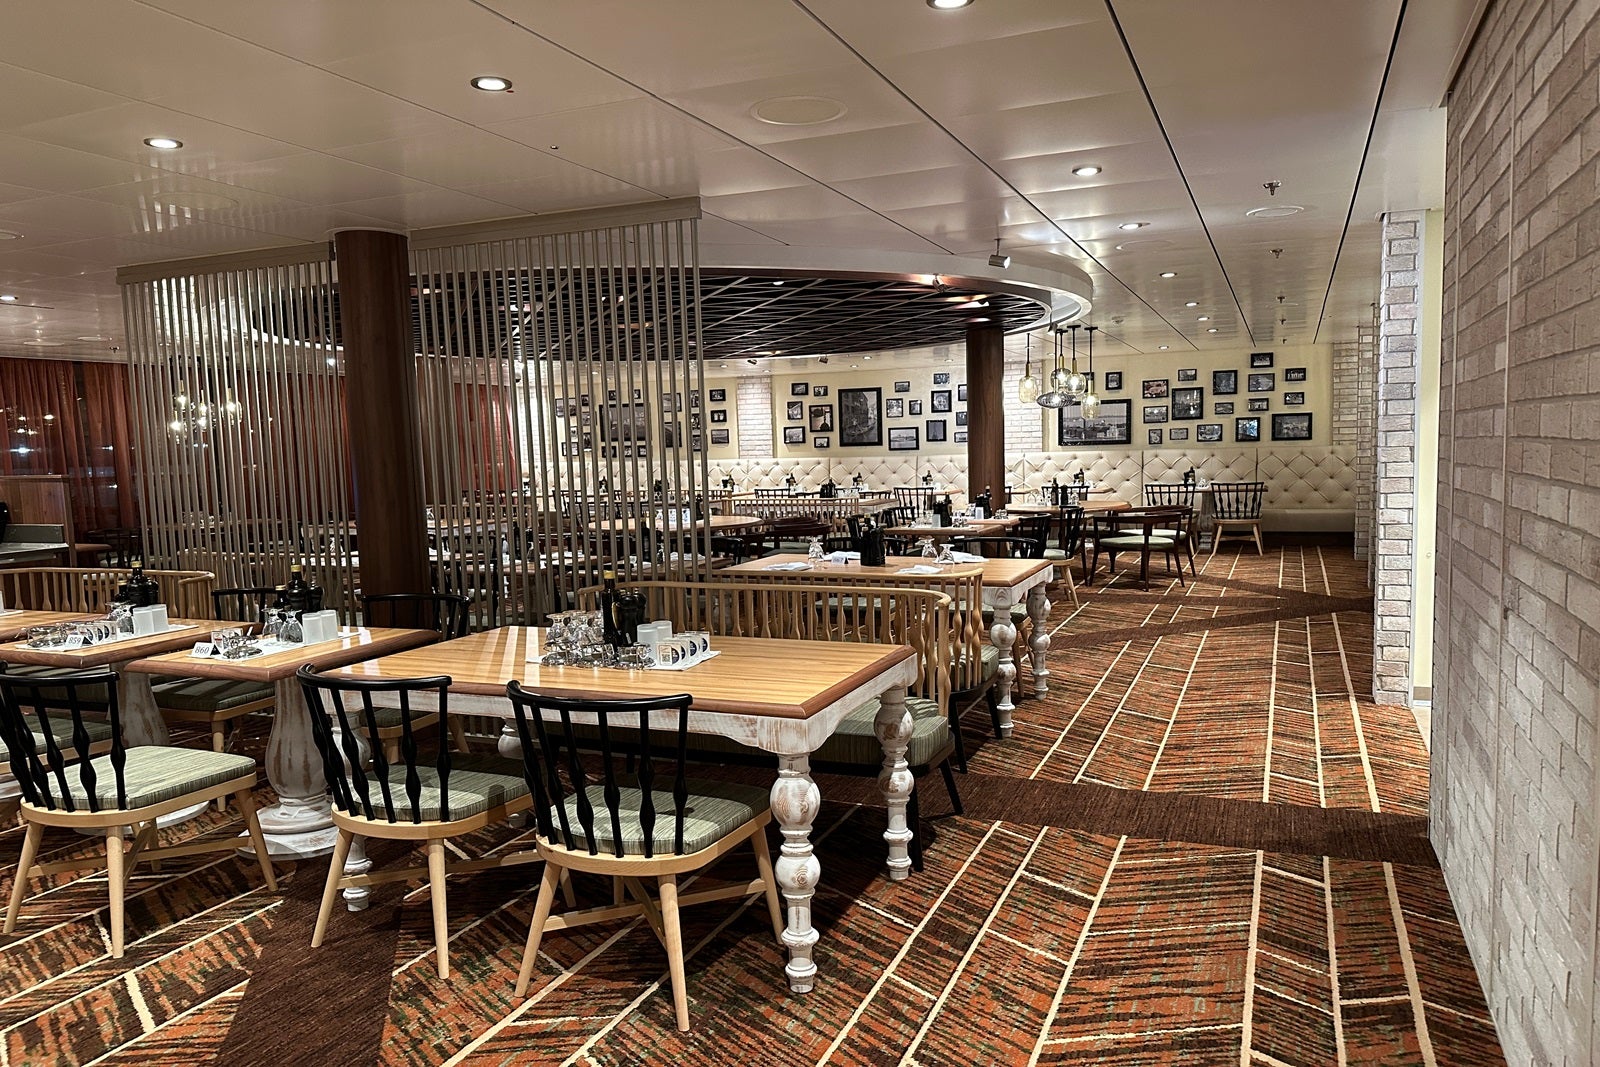 A cruise ship dining room with wooden tables and chairs